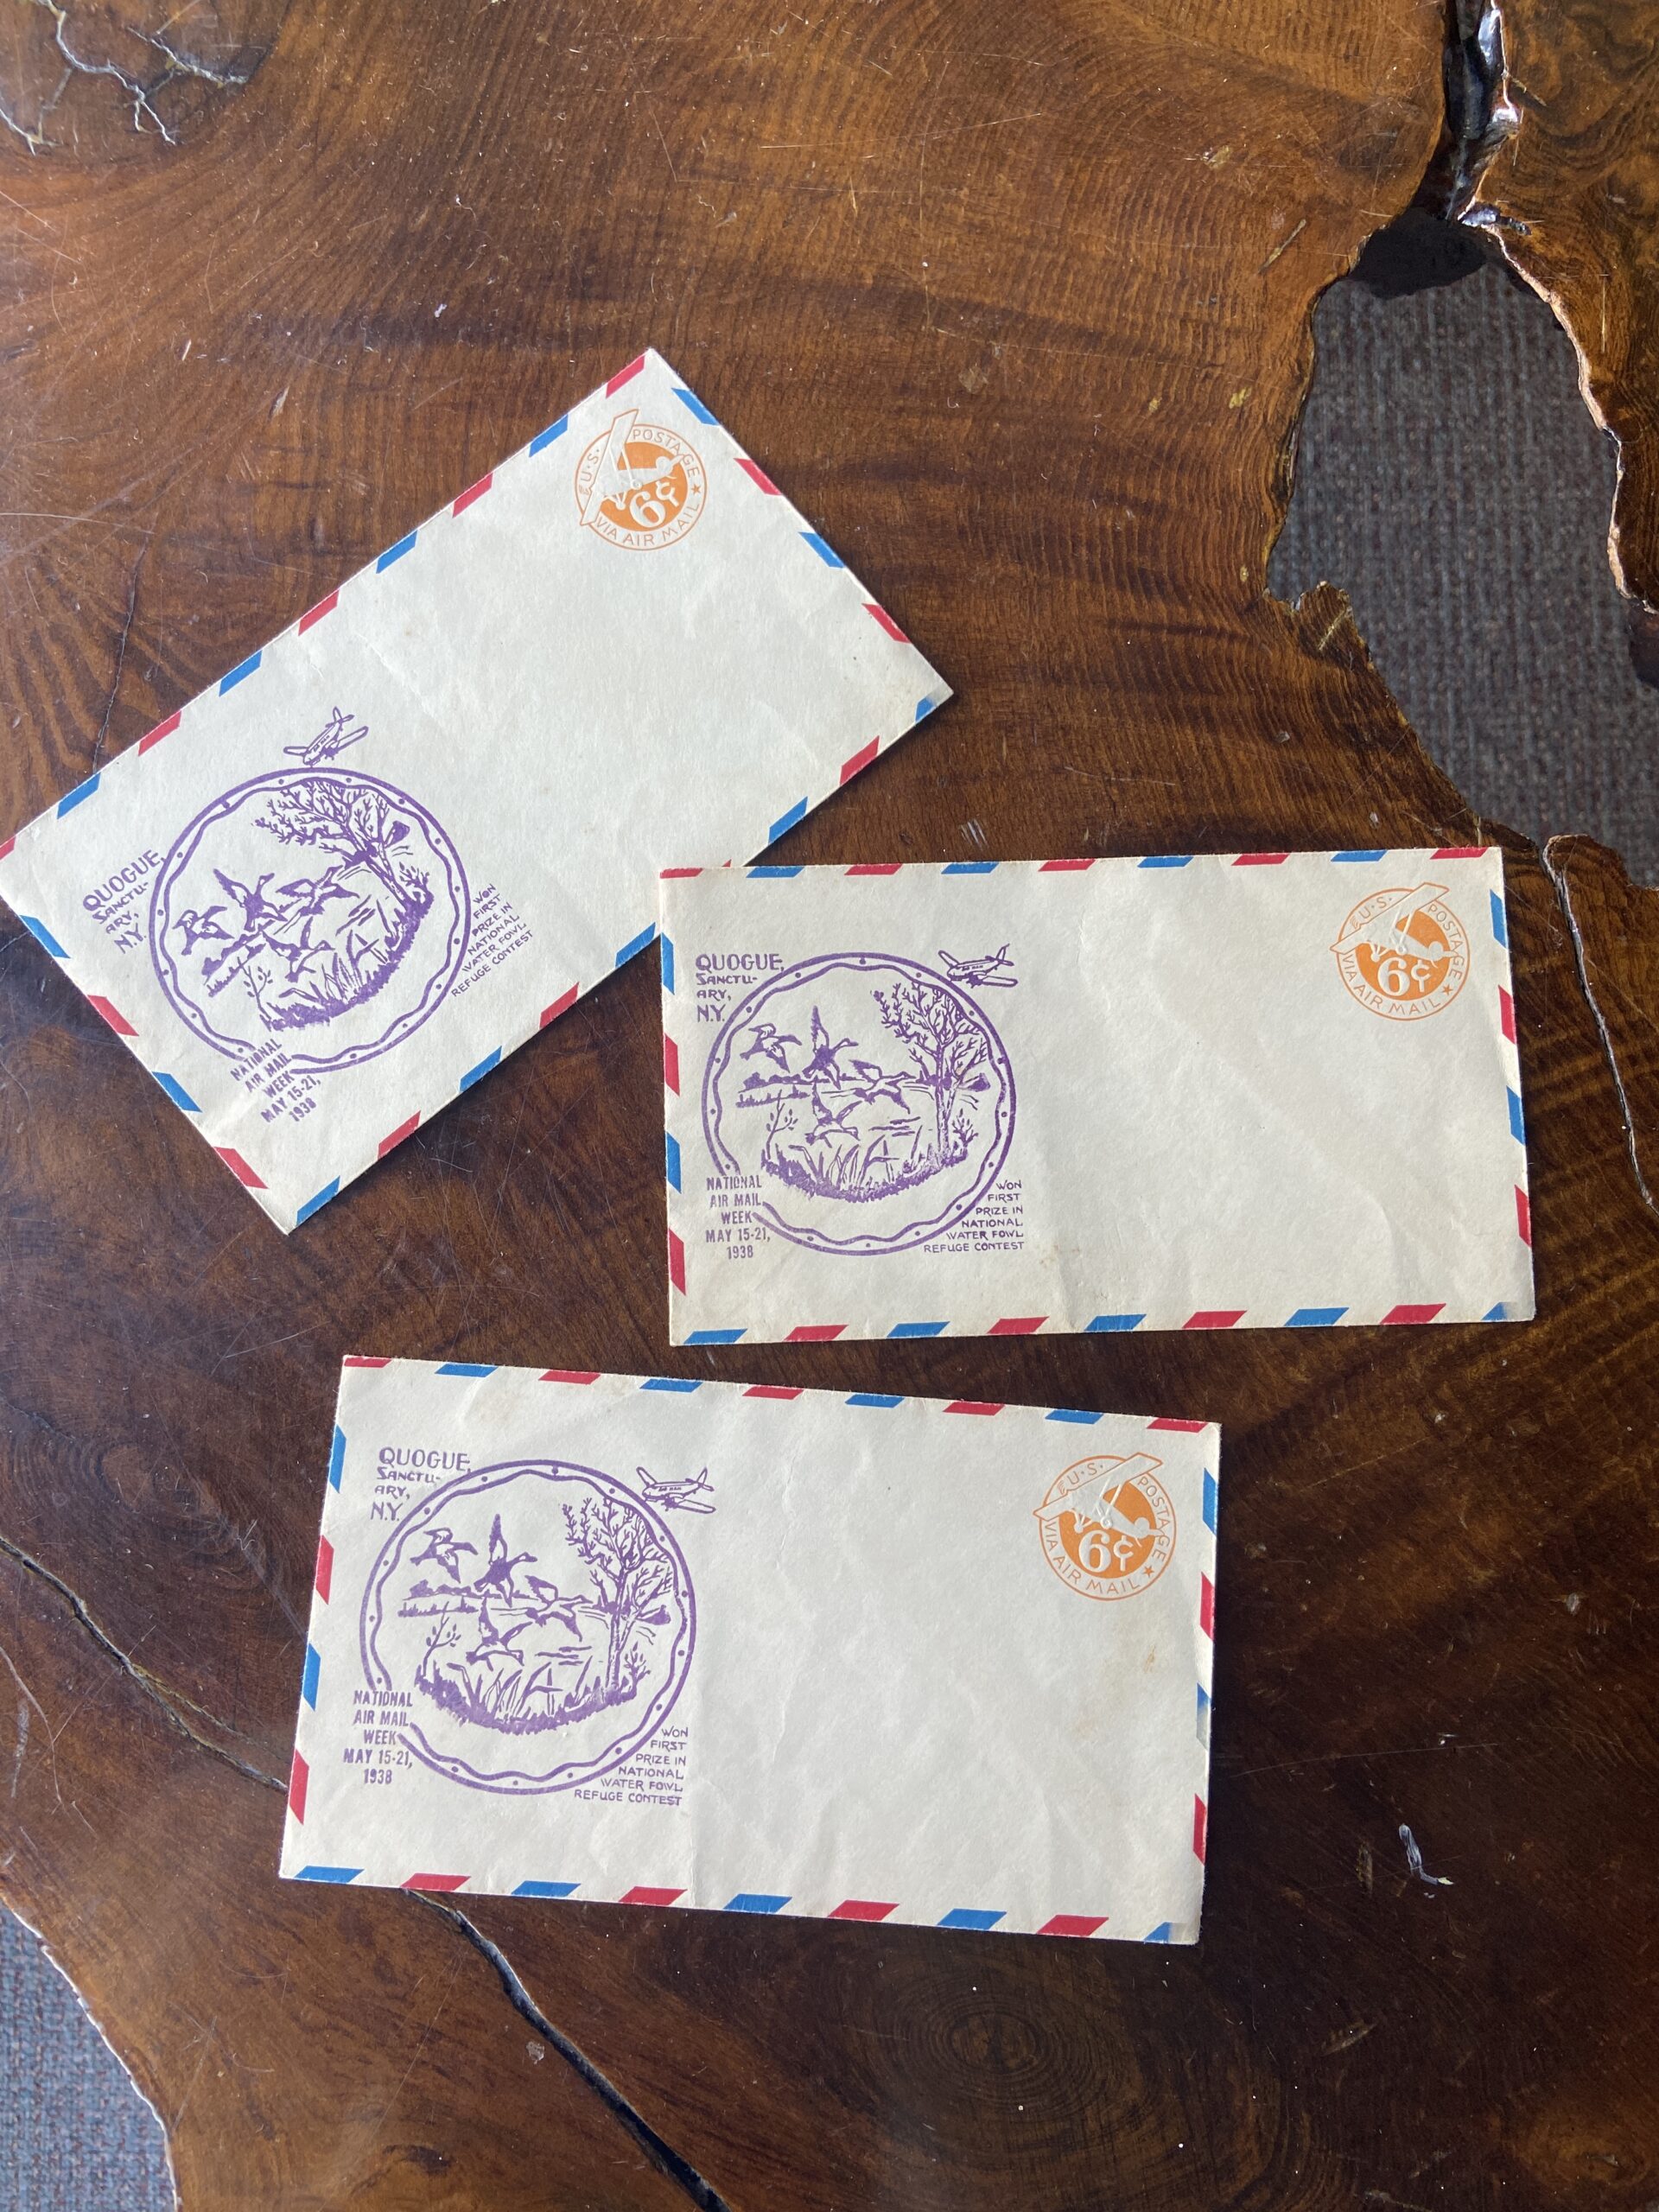 Antique envelopes from National Airmail week in 1938, featuring a stamp of Quogie Wildlife refuge drawn by Roland Clark.